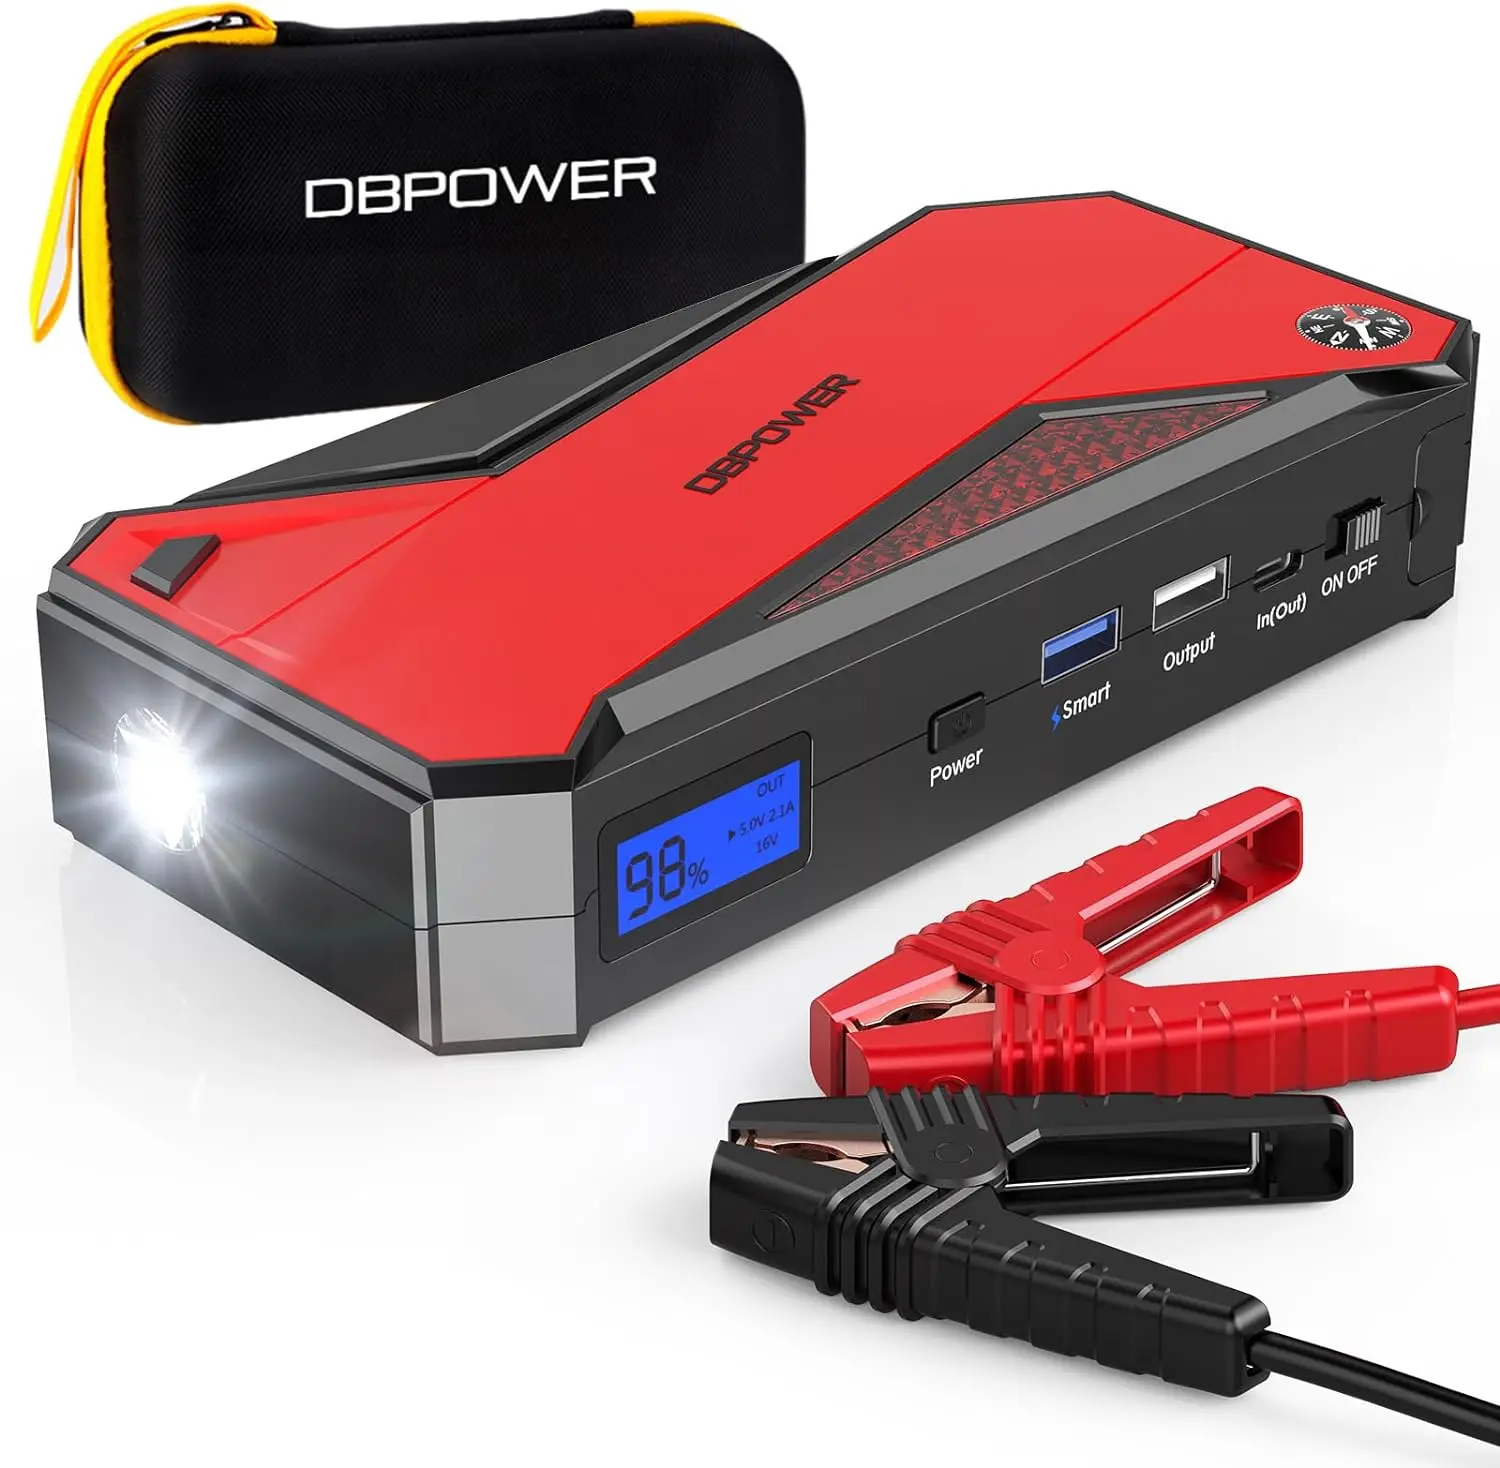 

Peak 1600A 18000mAh Portable Car Jump Starter (up to 7.2L Gas, 5.5L Diesel Engine) Booster with Smart Charging Port, Compass, L